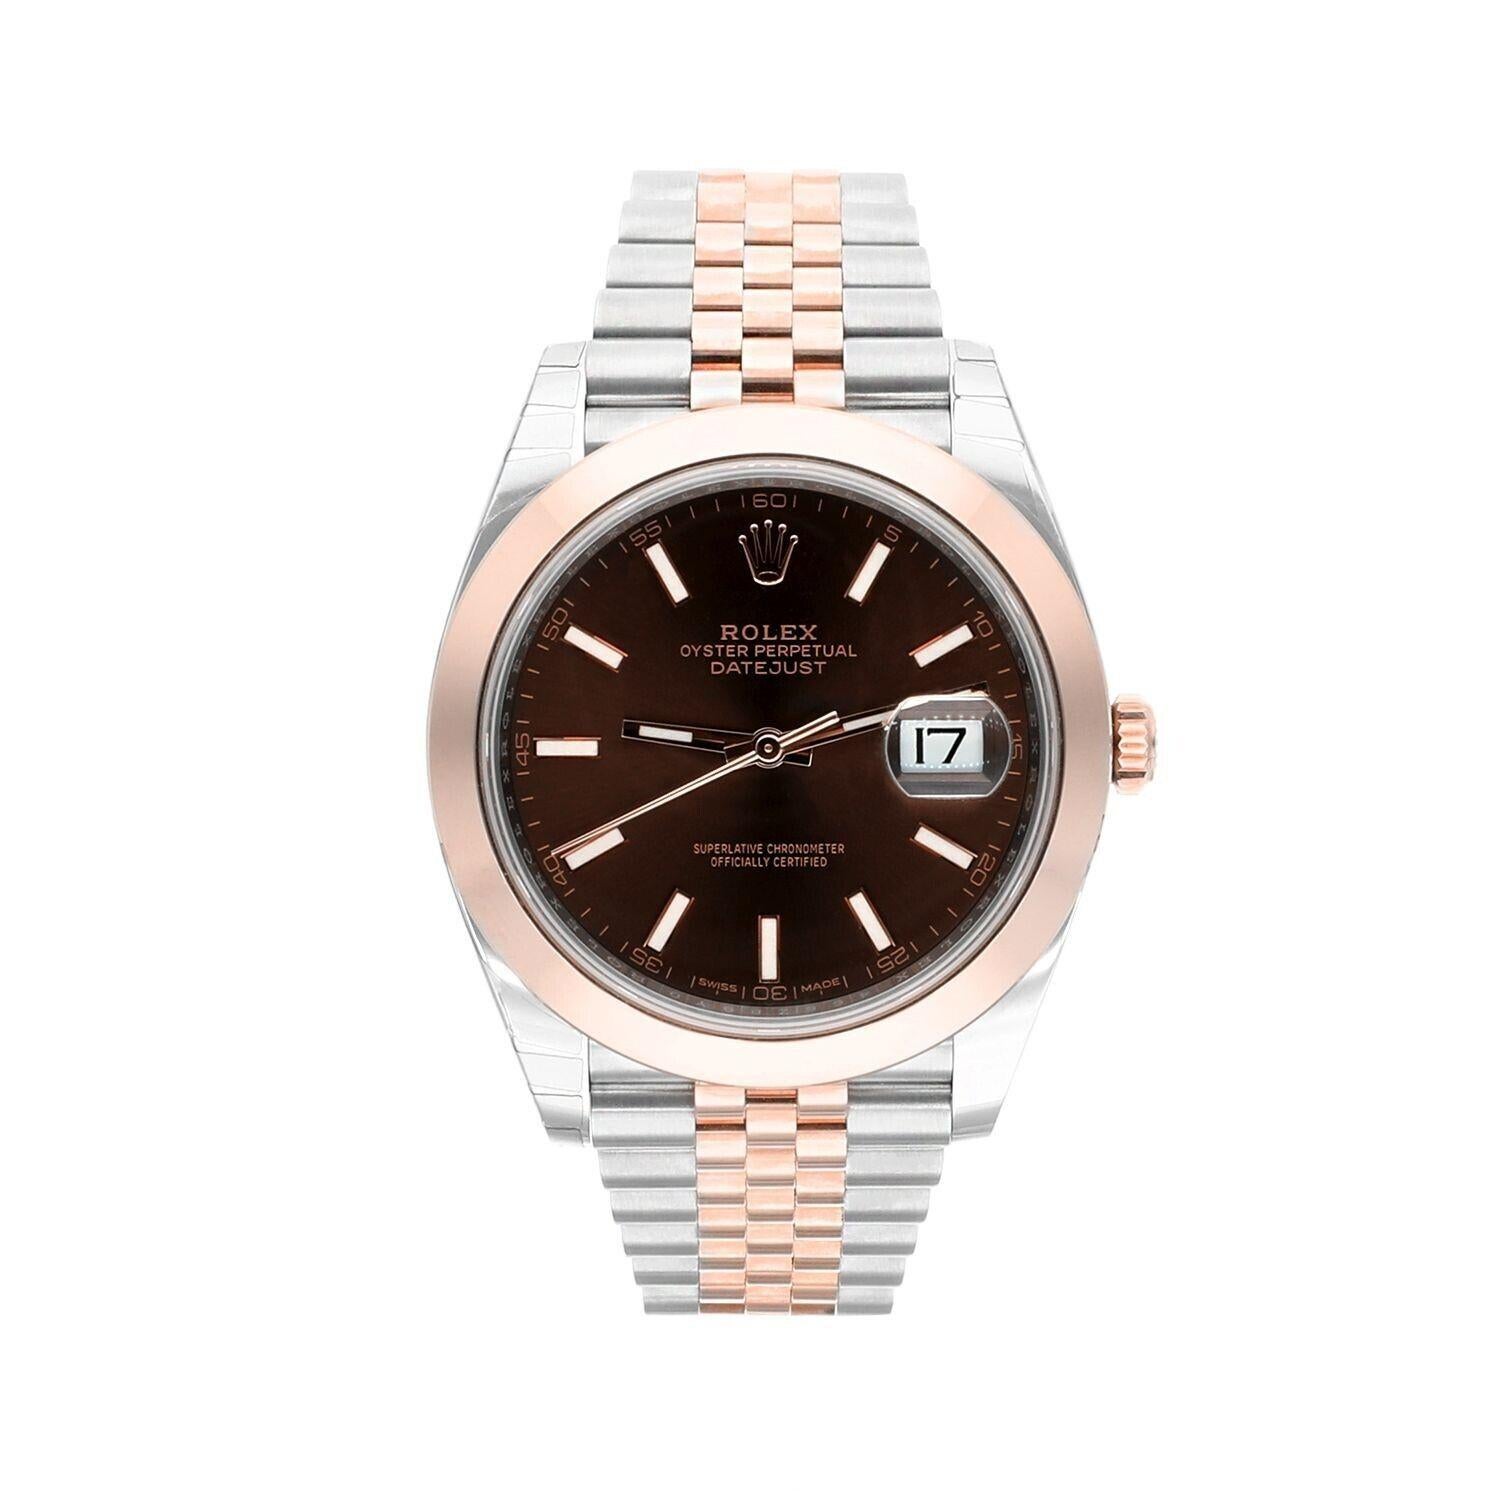 Rolex Datejust 41mm Stainless Steel/Rose Gold Jubilee Mens Watch 126301 Complete, with Factory Stickers.
New Old Stock. Has never been worn. Comes complete and is covered by our 2 year in house warranty.

Stainless steel case with a stainless steel